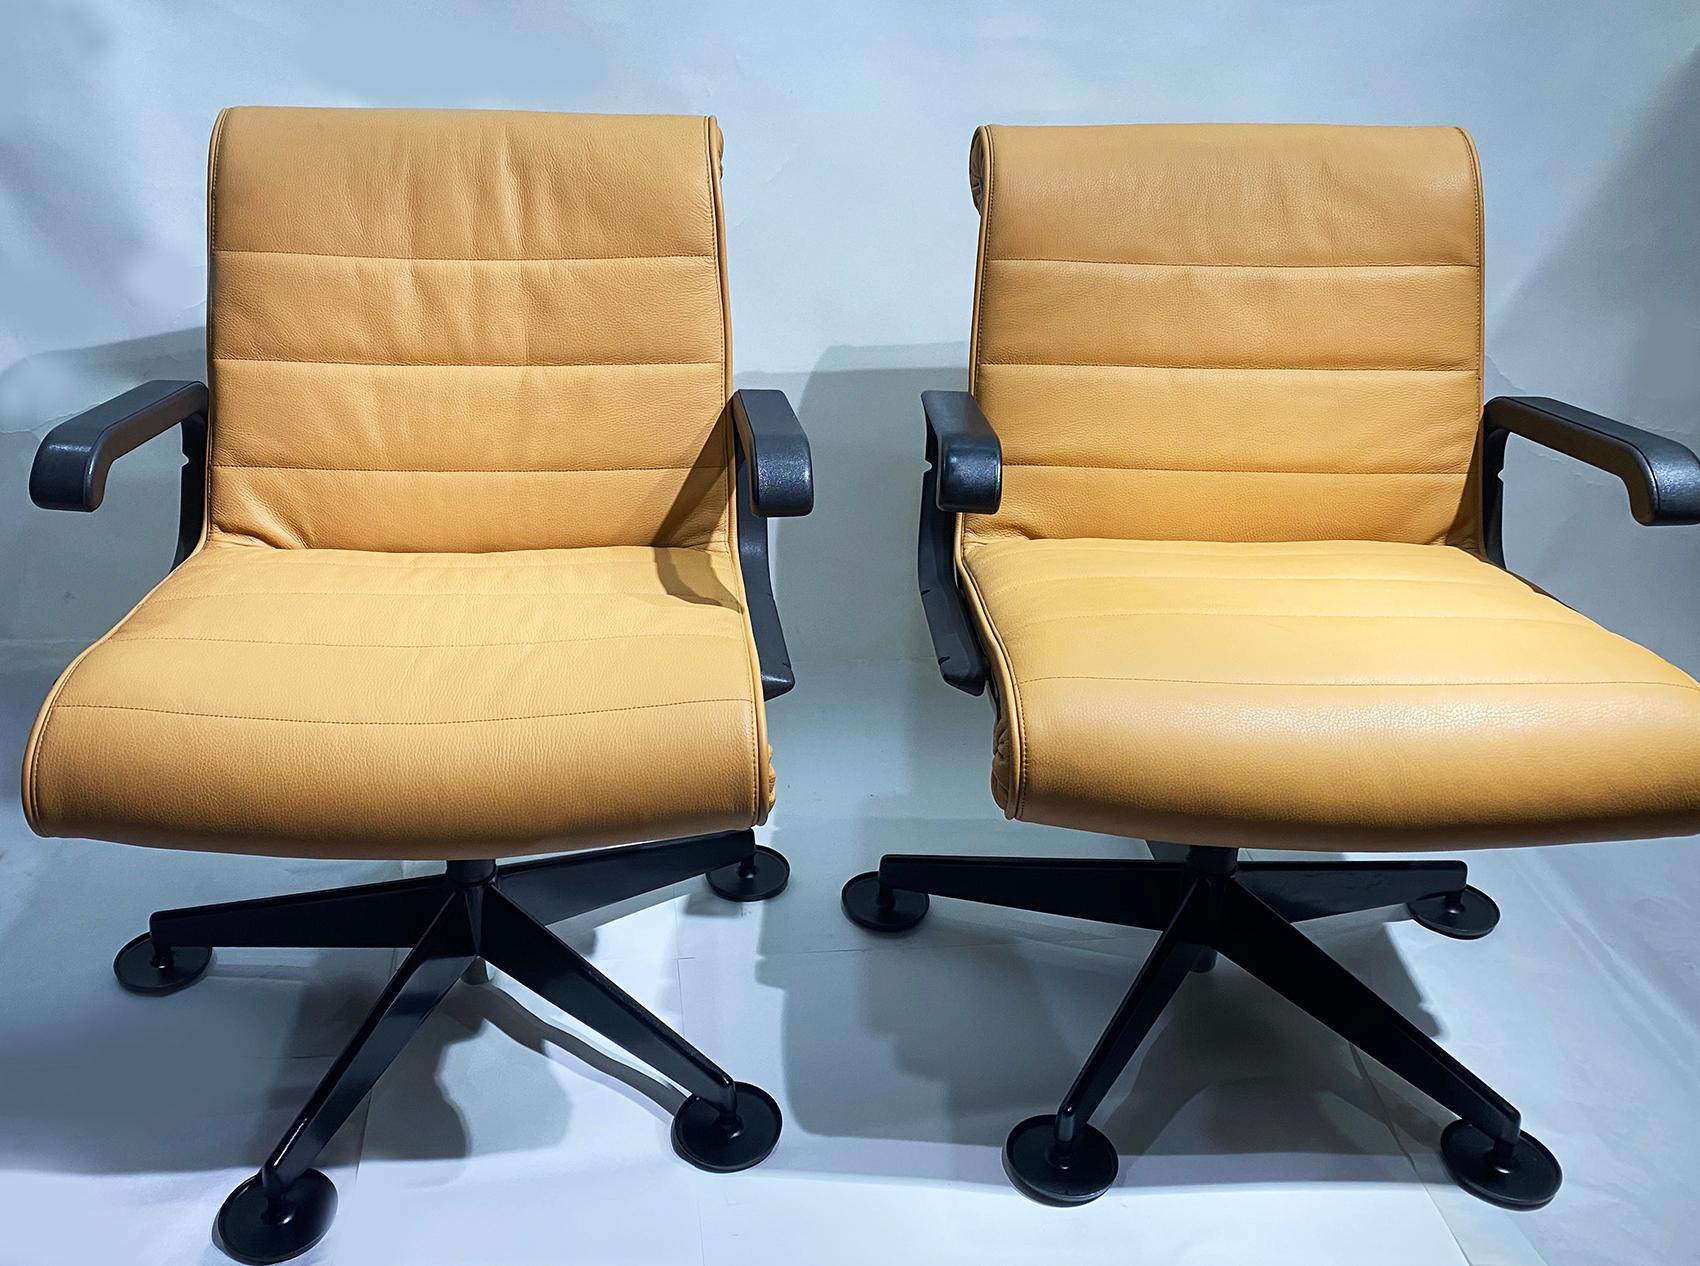 A set of two executive office chairs designed by Richard Sapper and made by Knoll. 
Five star bases reupholstered in fine leather Desert Color.
Sapper merges elegant lines with advanced ergonomic features to form a seating conglomerate worthy of